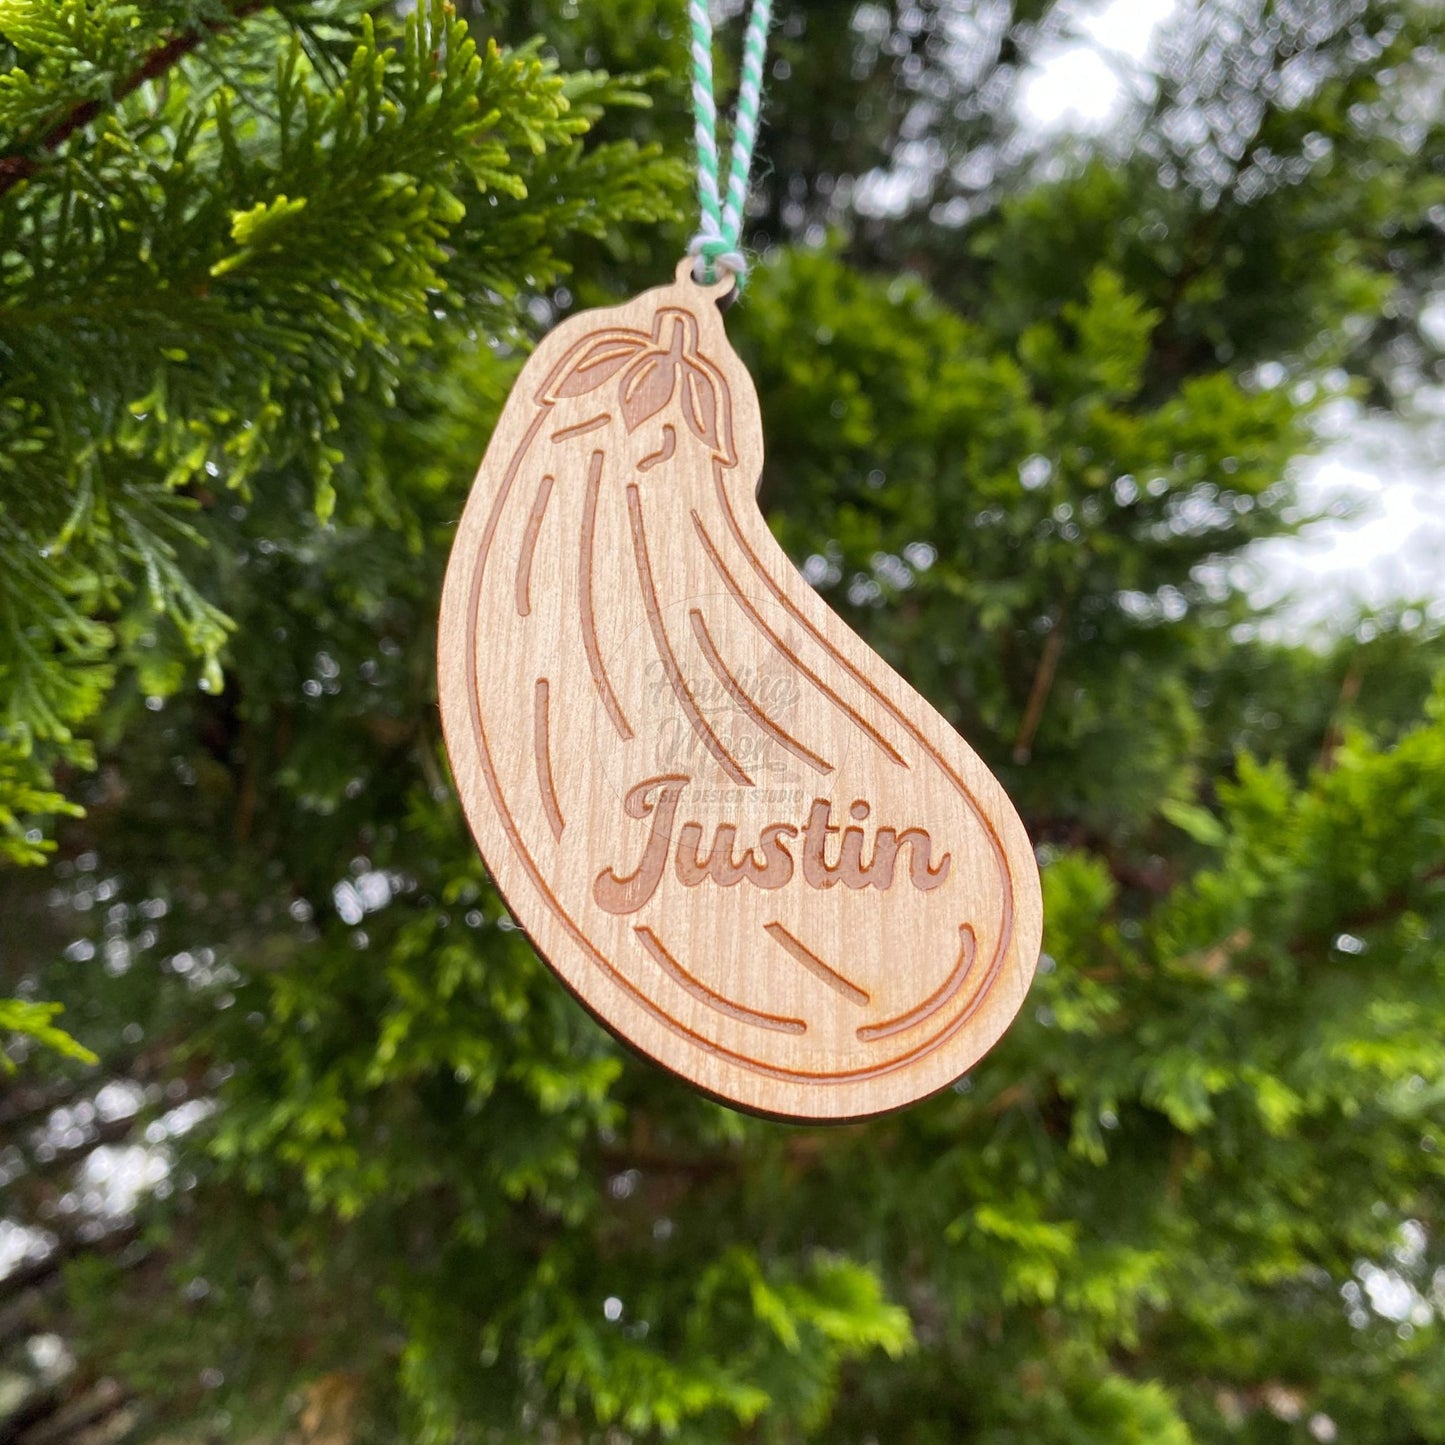 Close up view of Personalized eggplant ornament from Howling Moon Laser Design Studio in Virginia USA